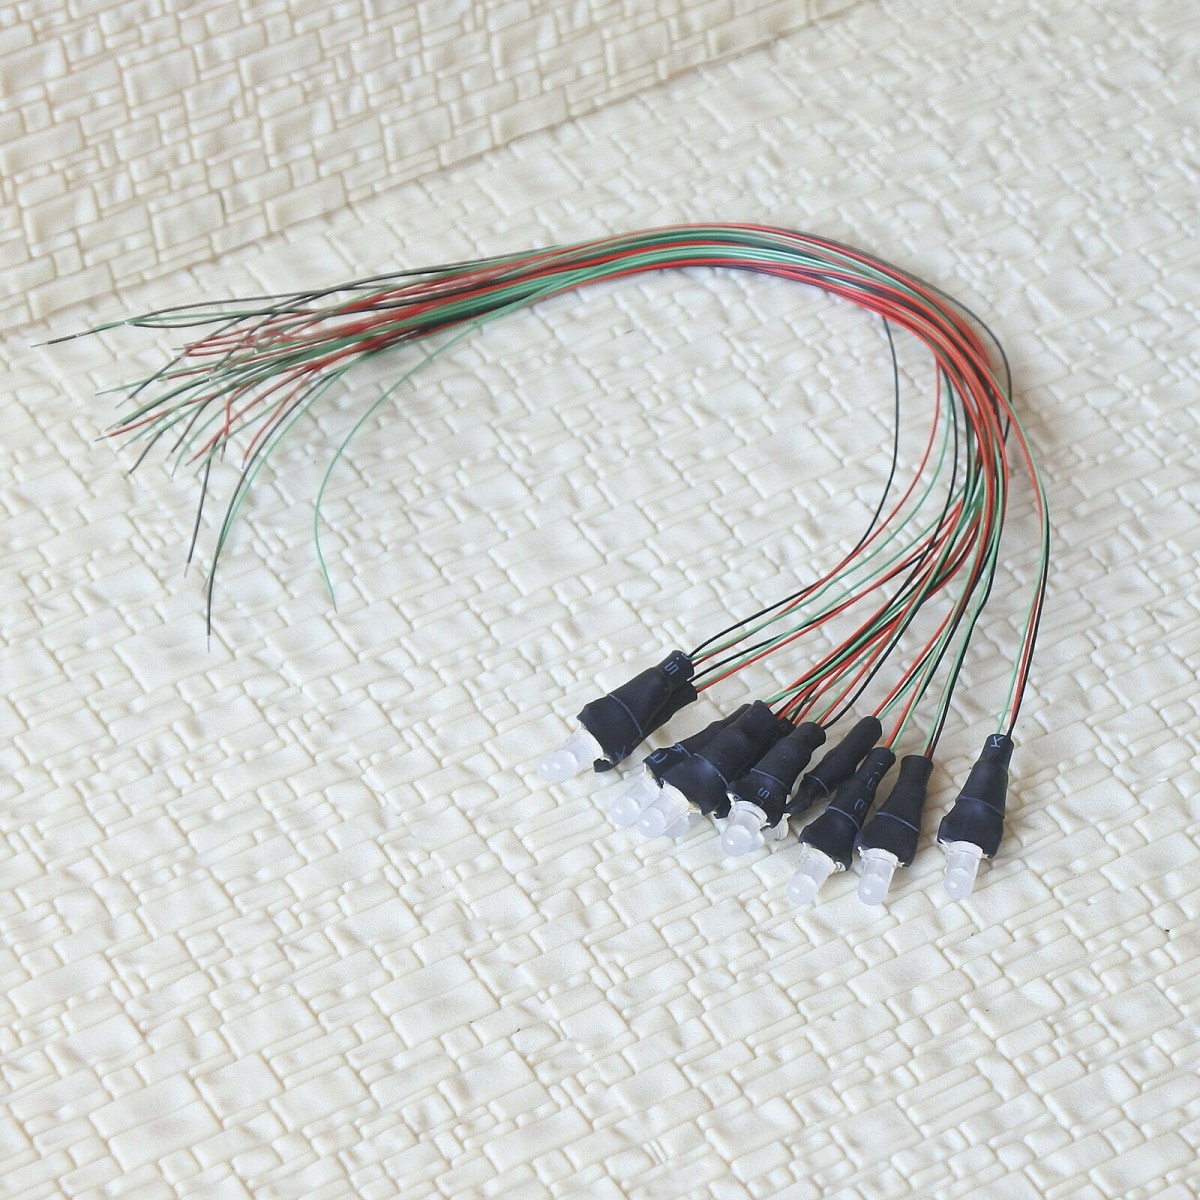 5 x pre-soldered 3mm bicolor LEDs common anode Red/Green wired 12V DC resistor